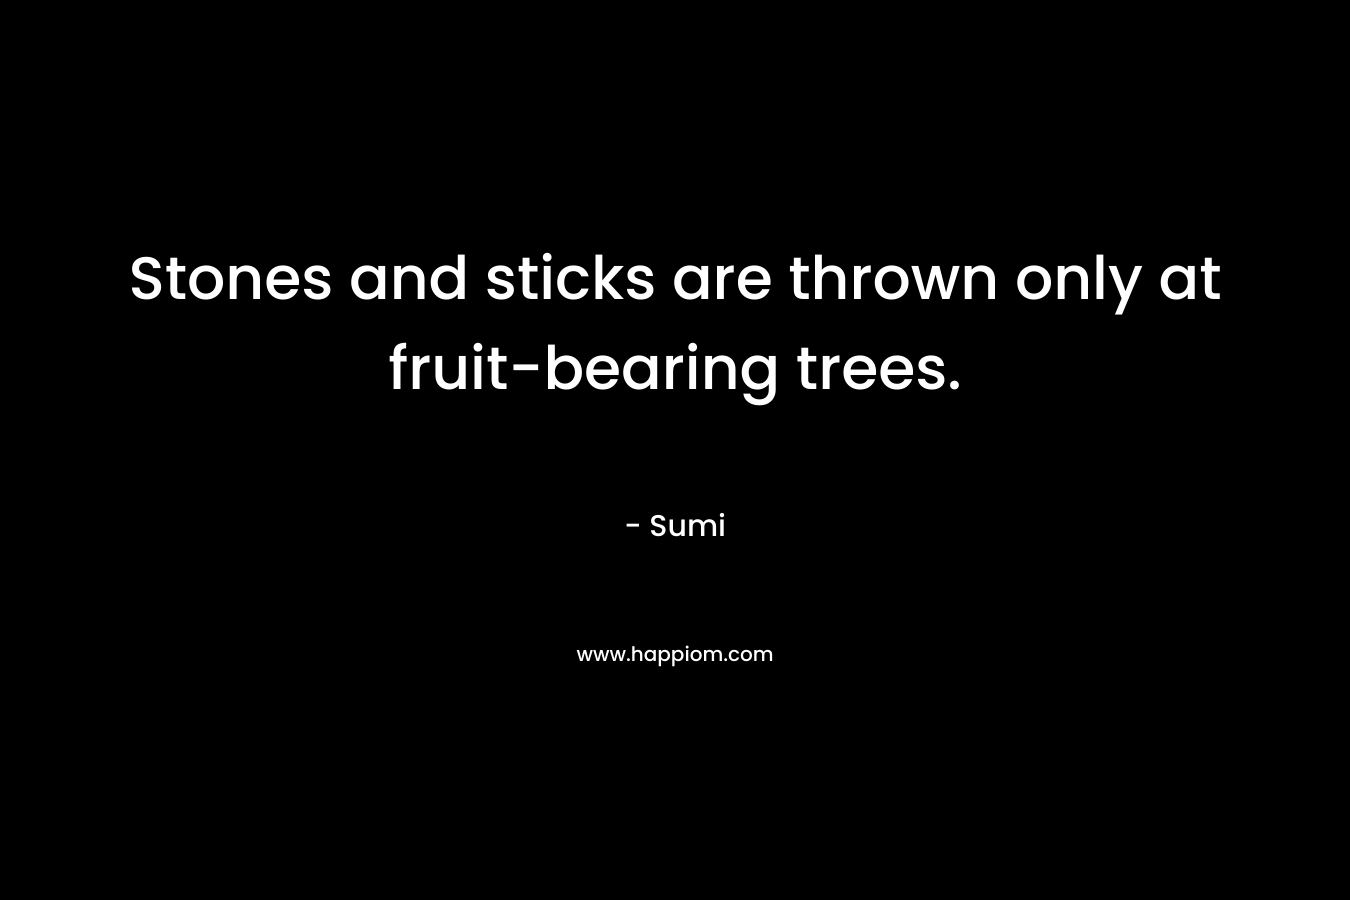 Stones and sticks are thrown only at fruit-bearing trees.